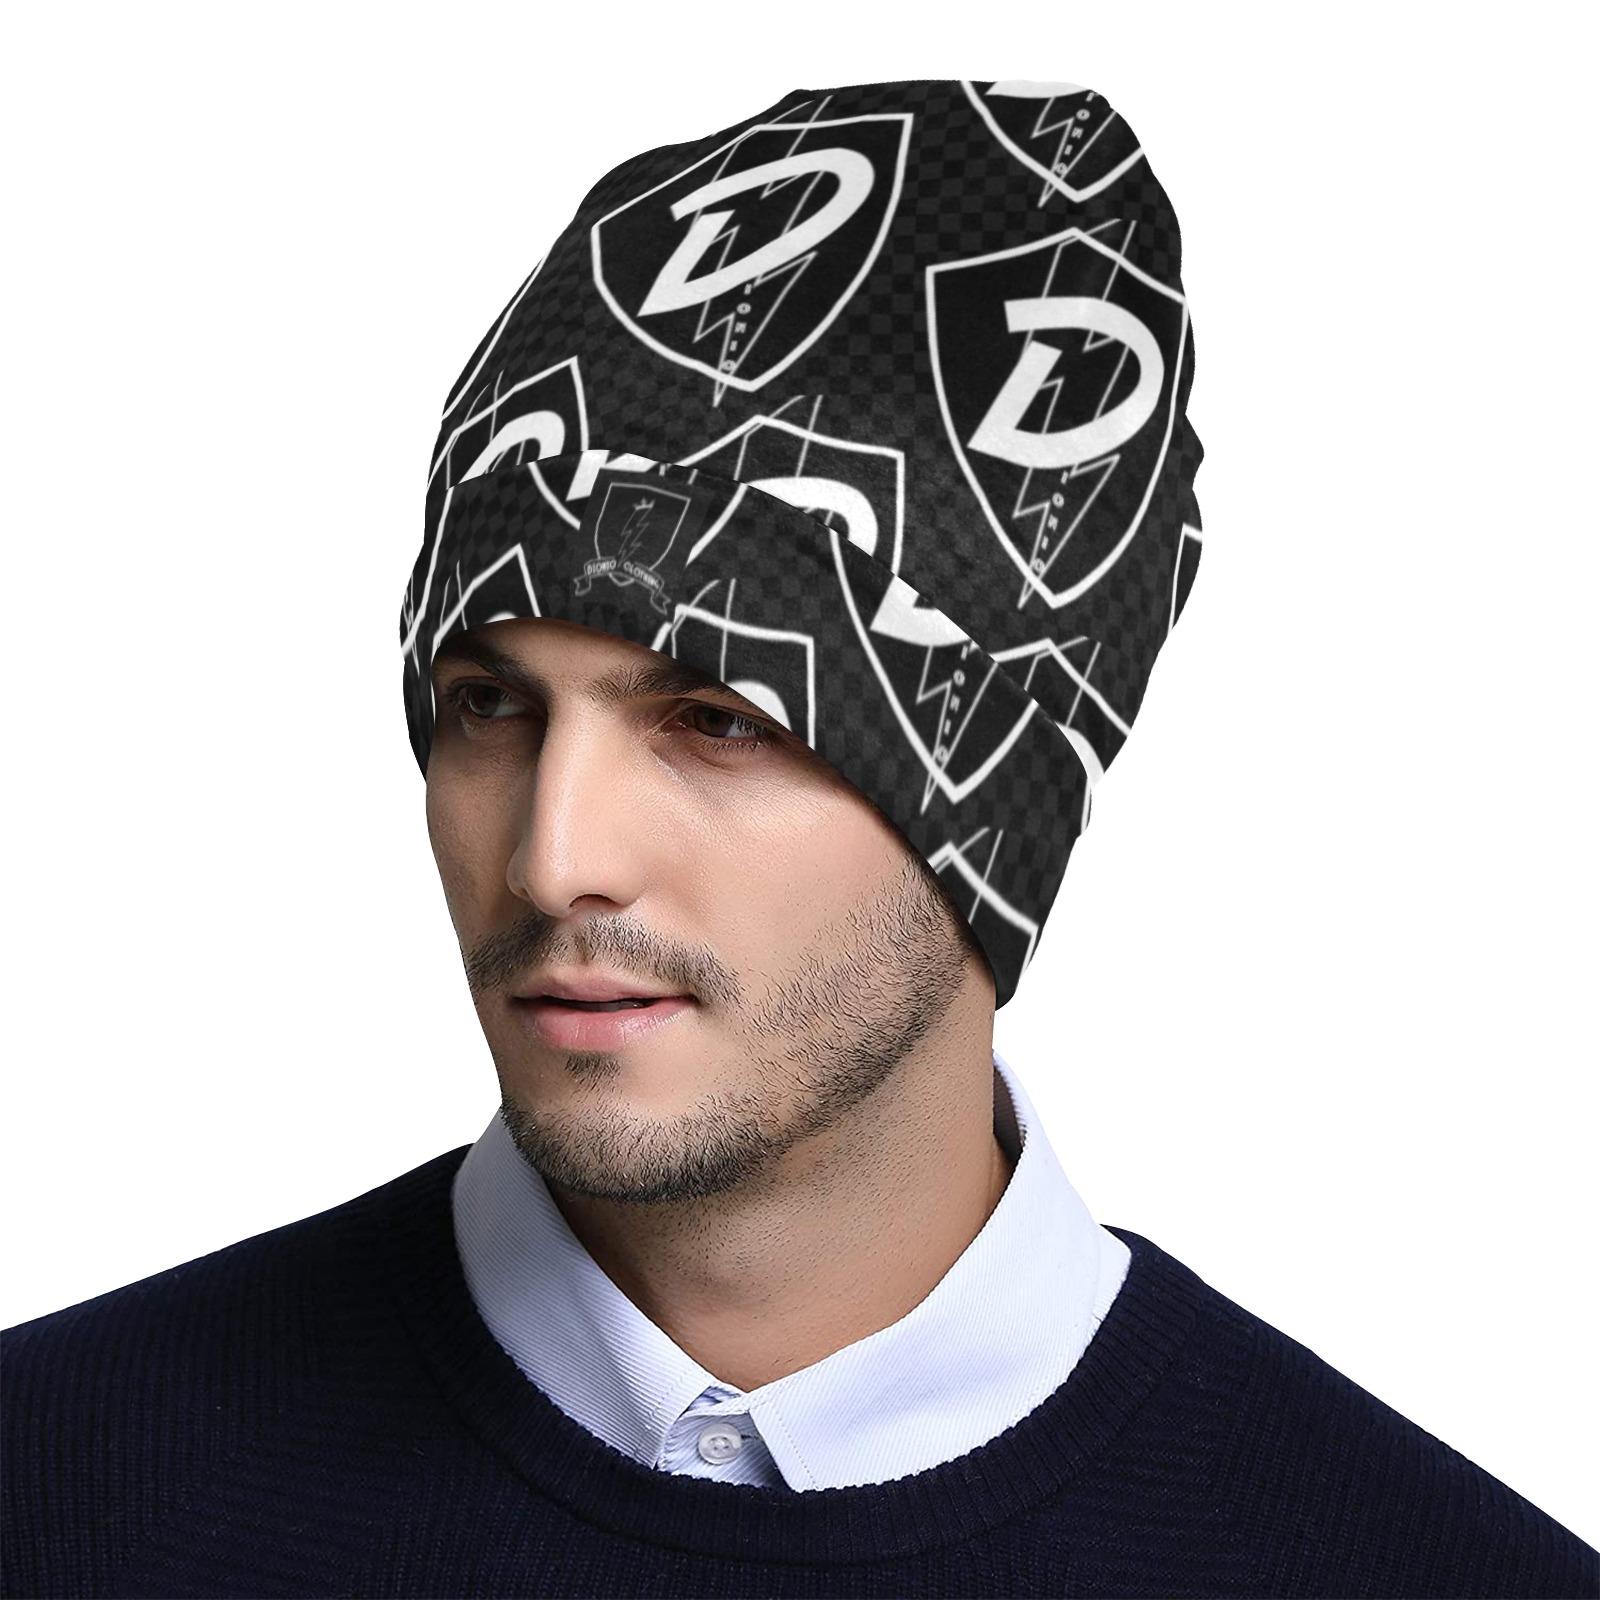 DIONIO Clothing - Black & White D Shield Repeat Grand Prix Beanie Hat All Over Print Beanie for Adults